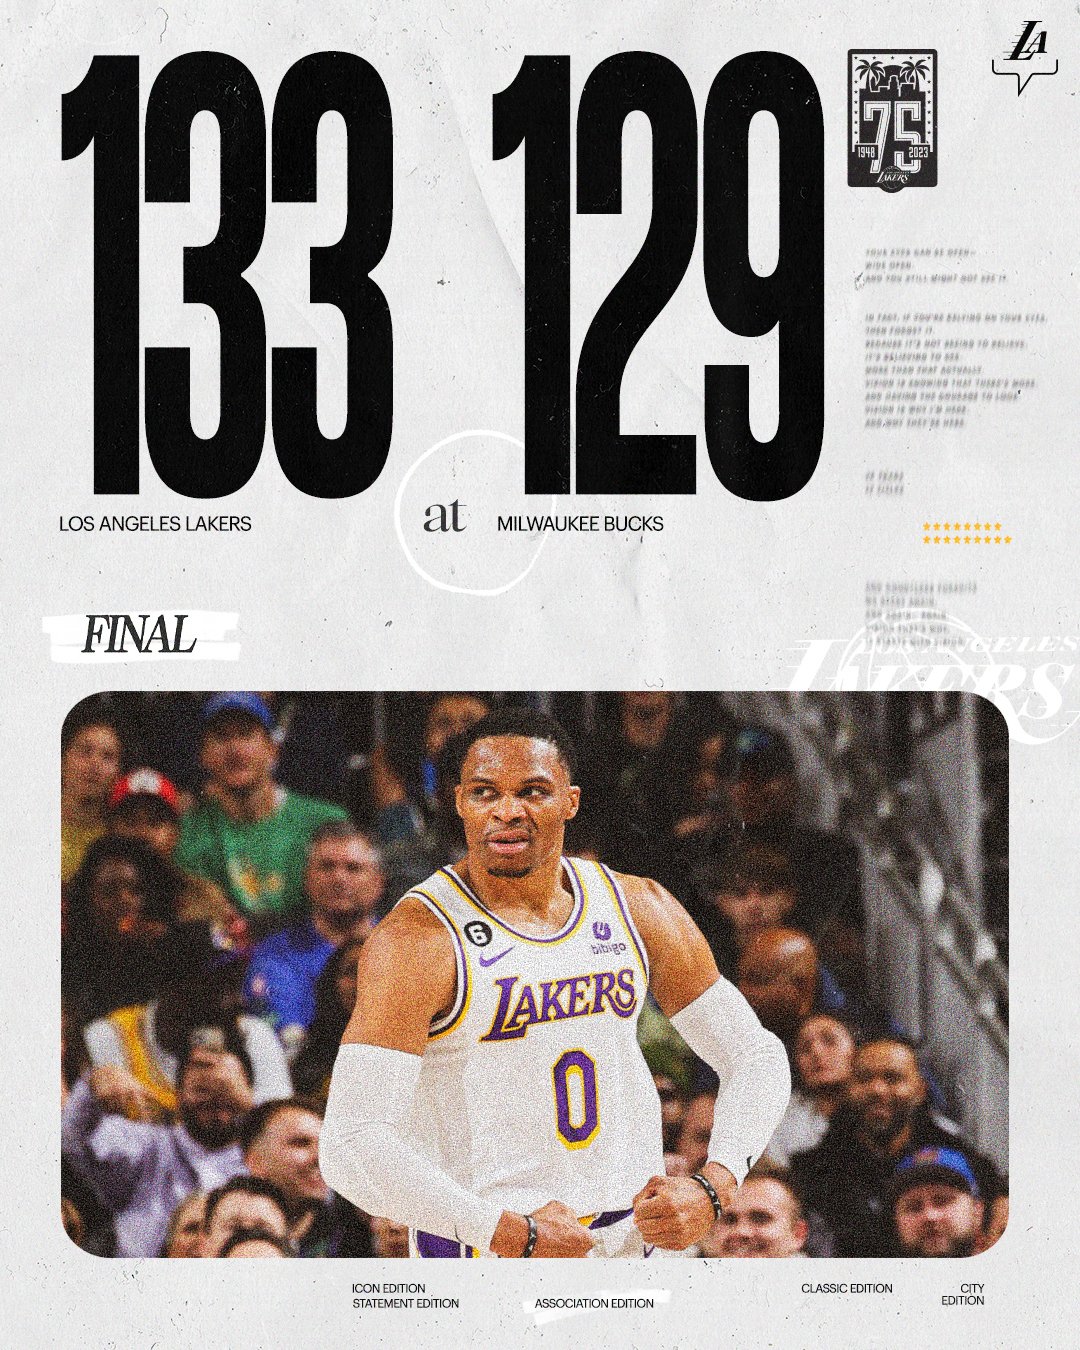 The Lakers beat the Bucks 133-129 on Friday night's match